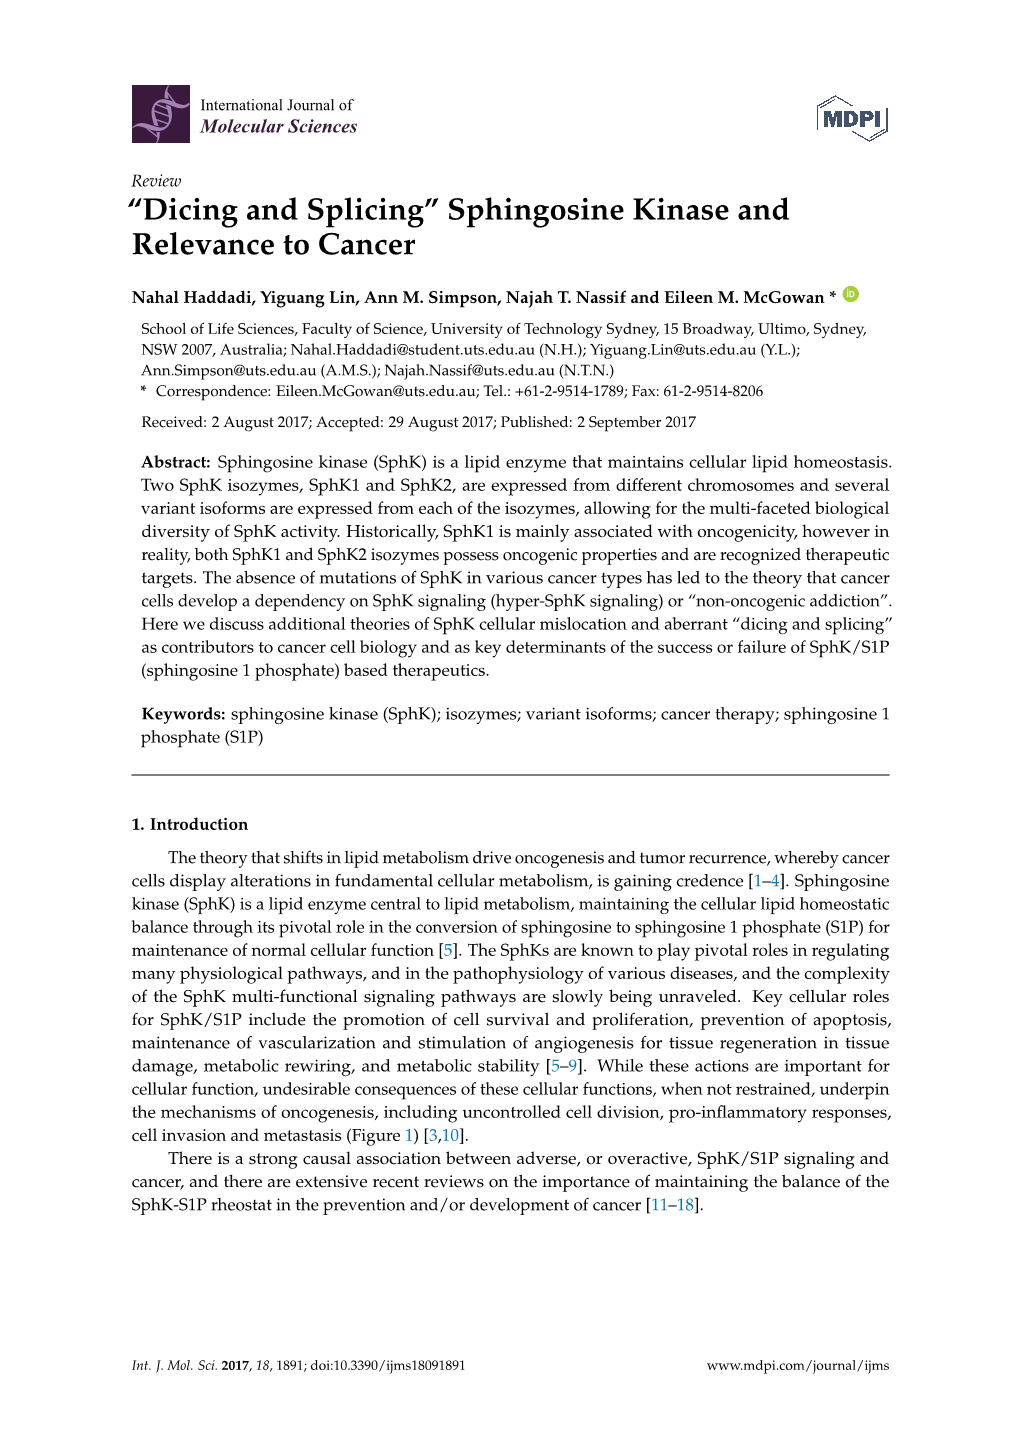 Sphingosine Kinase and Relevance to Cancer